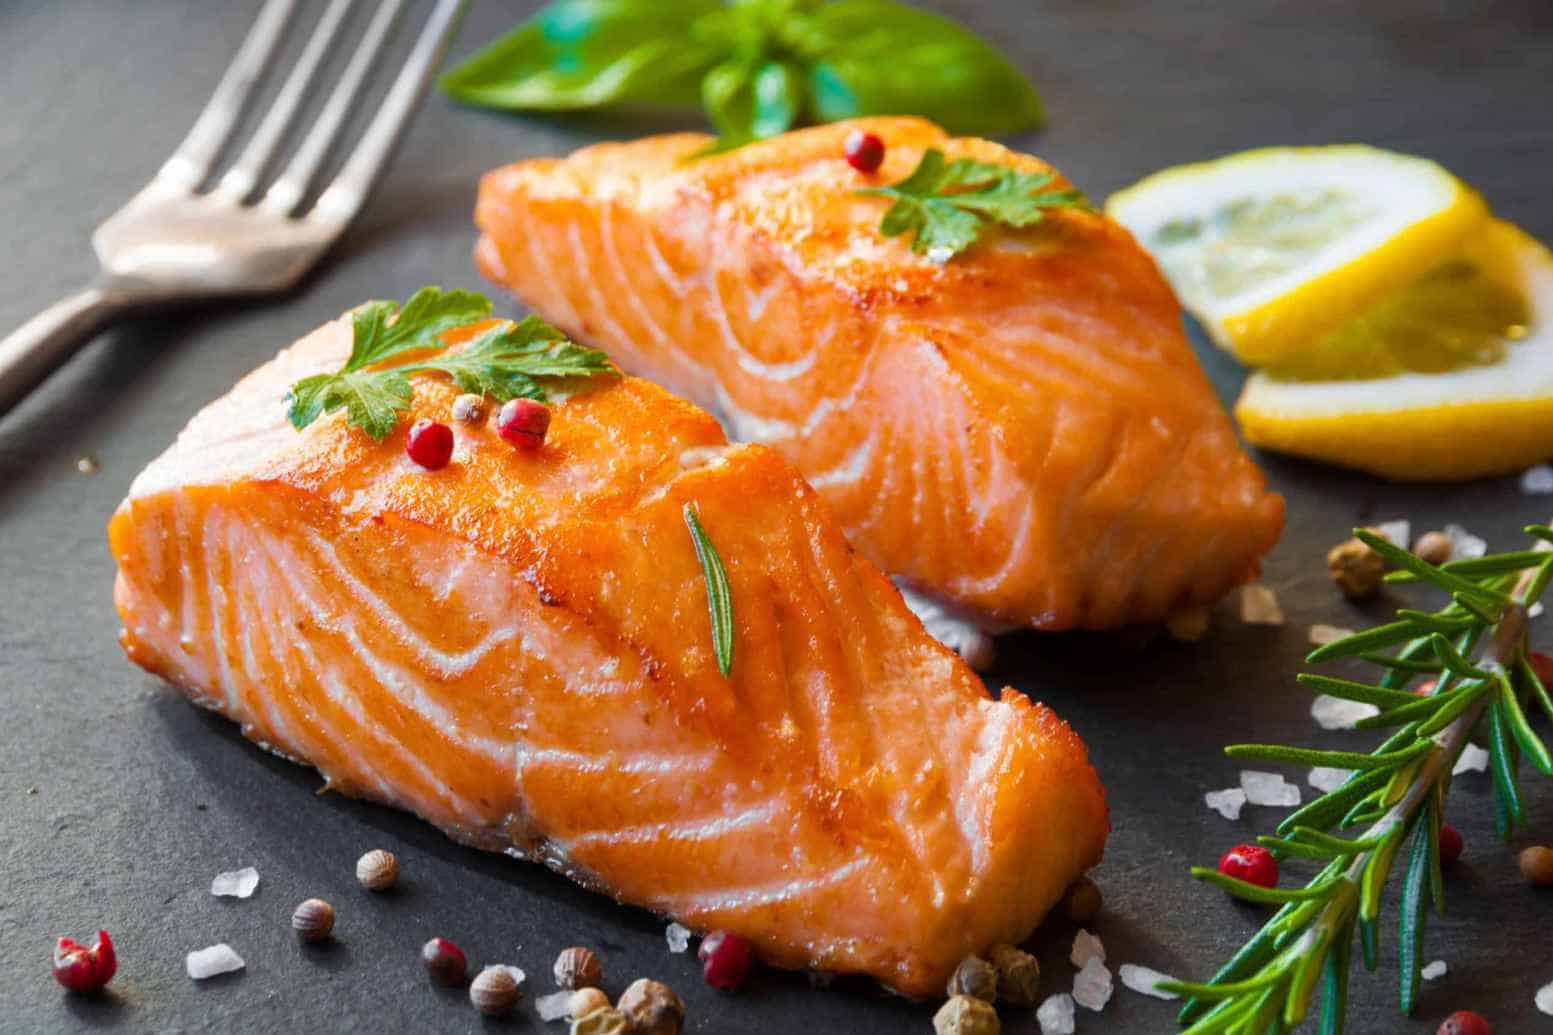 Best Side Dishes For Salmon